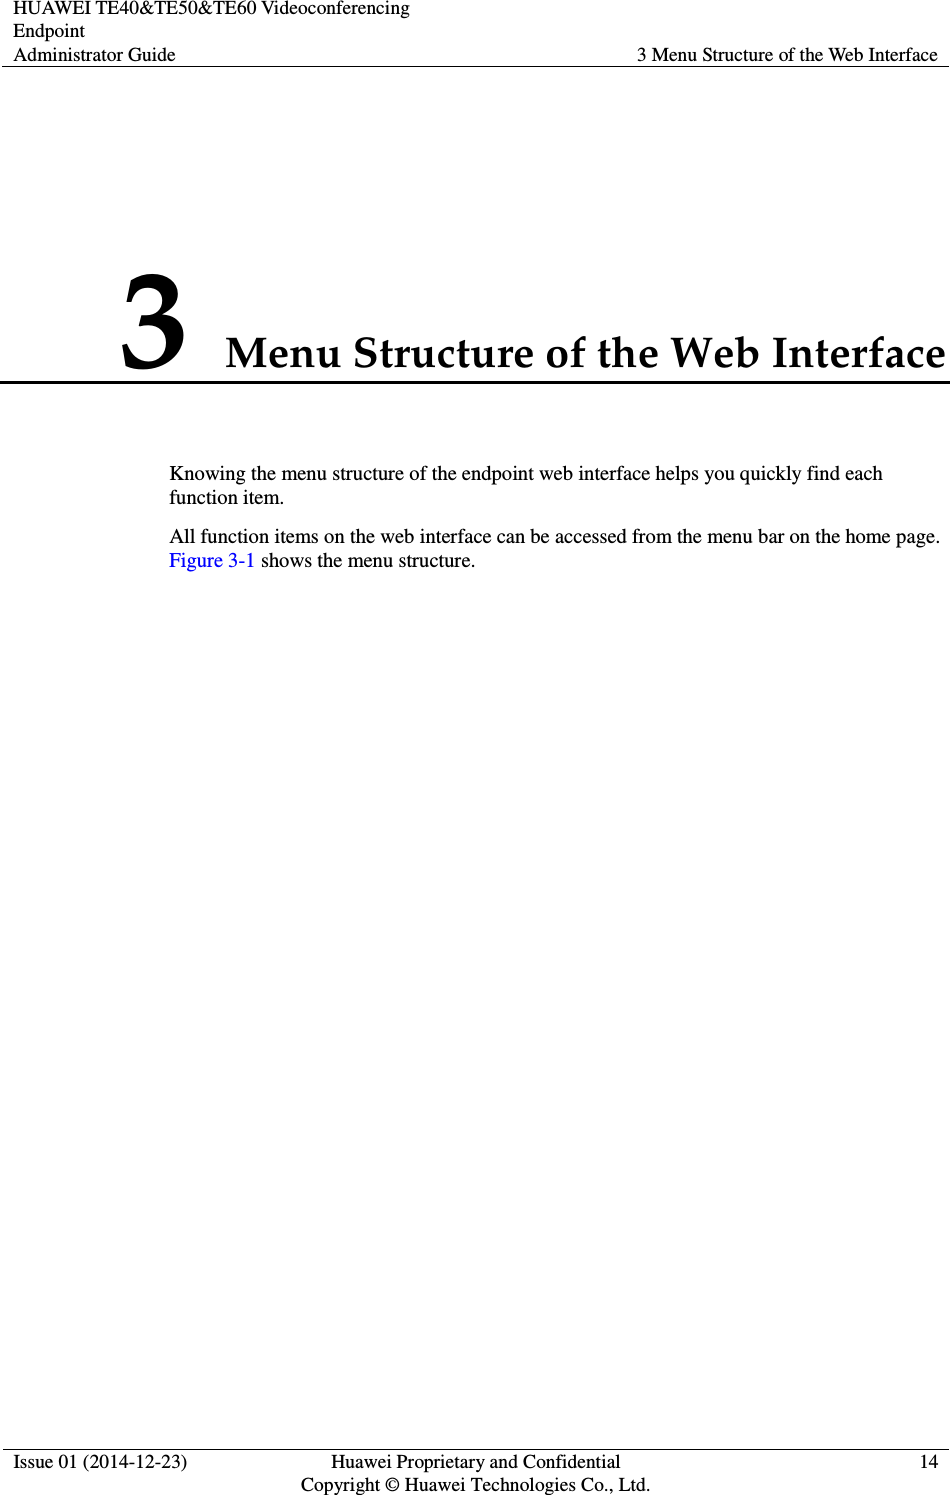 HUAWEI TE40&amp;TE50&amp;TE60 Videoconferencing Endpoint Administrator Guide  3 Menu Structure of the Web Interface  Issue 01 (2014-12-23)  Huawei Proprietary and Confidential                                     Copyright © Huawei Technologies Co., Ltd. 14  3 Menu Structure of the Web Interface Knowing the menu structure of the endpoint web interface helps you quickly find each function item. All function items on the web interface can be accessed from the menu bar on the home page. Figure 3-1 shows the menu structure. 